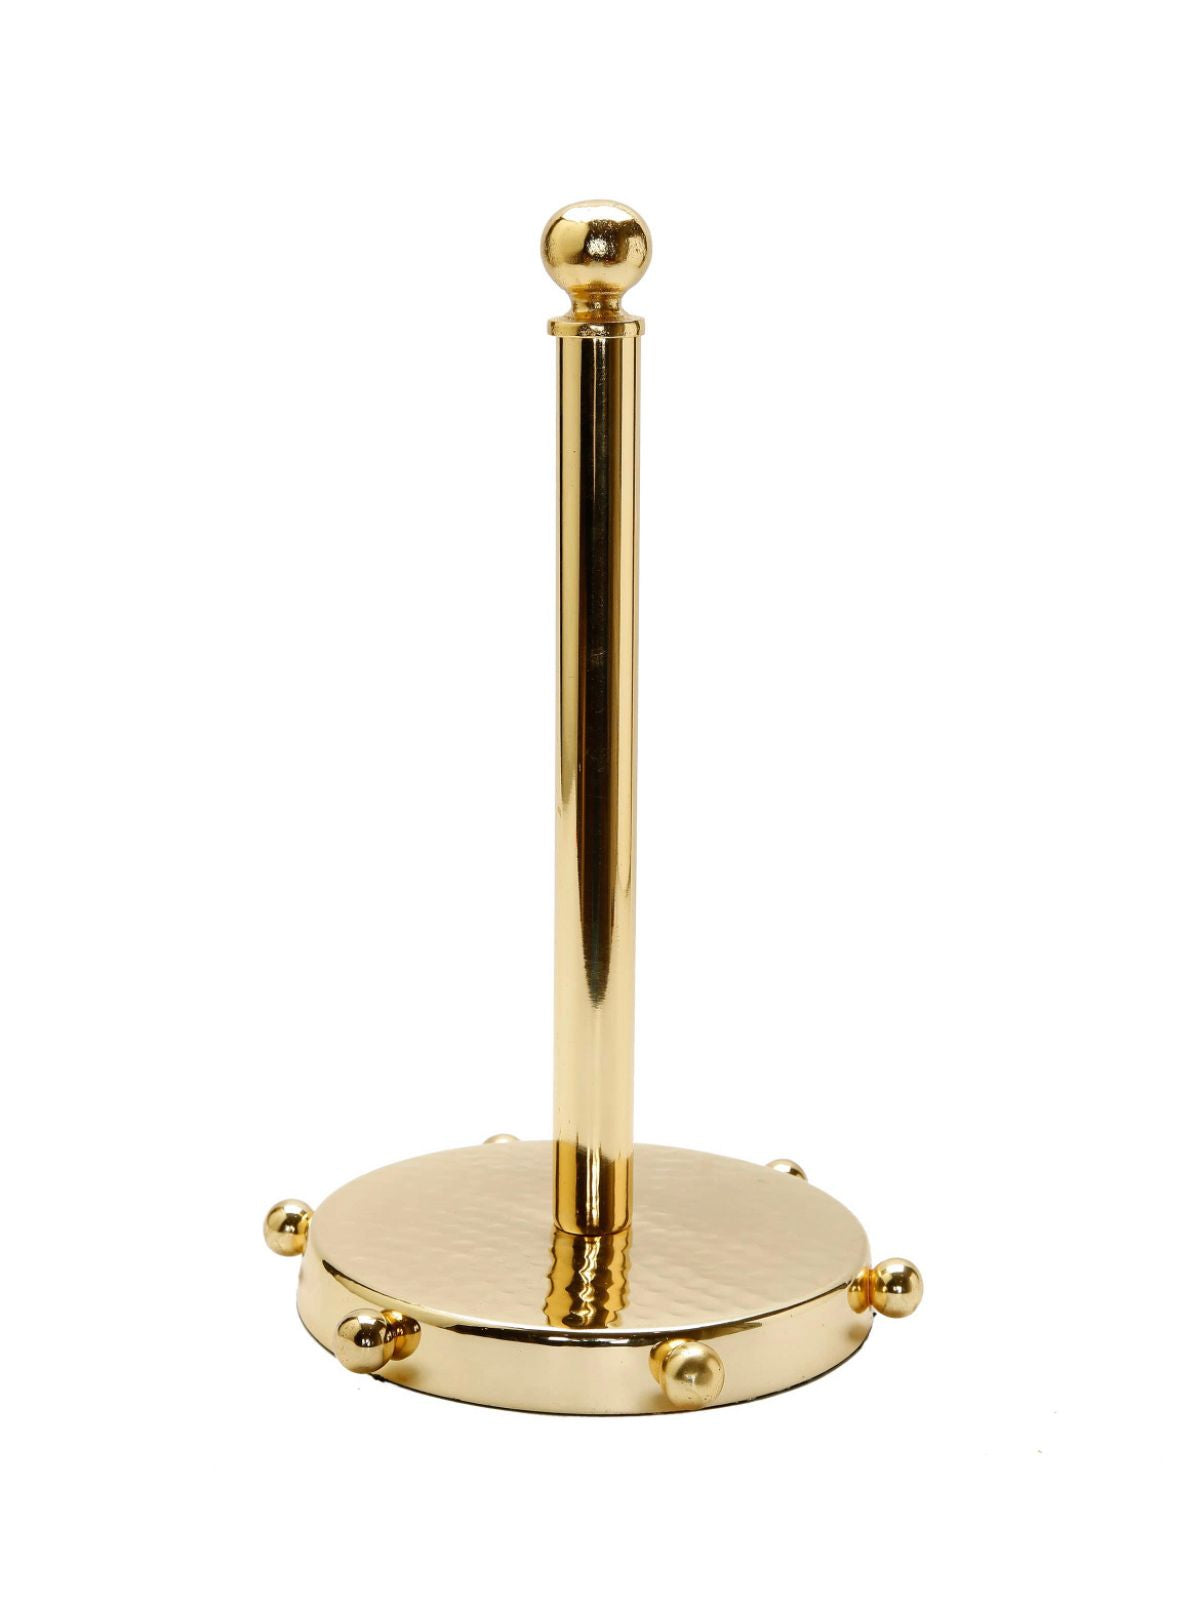 13H Luxury Paper Towel Holder With Gold Ball Design sold by KYA Home Decor.